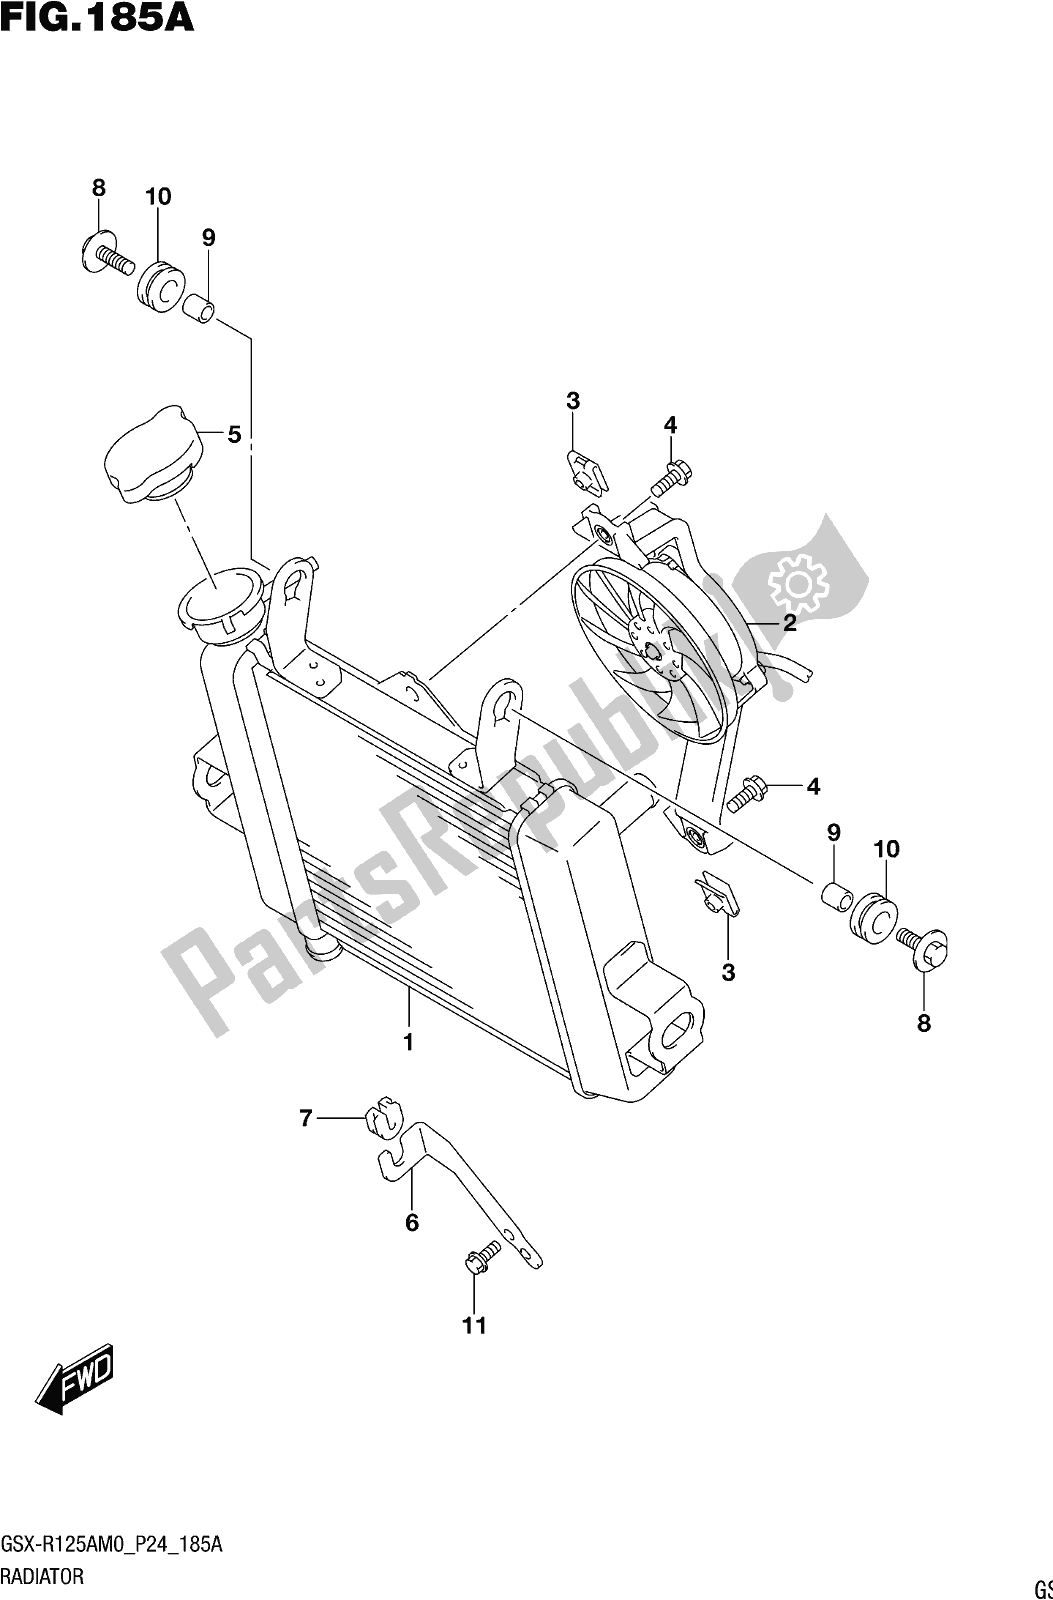 All parts for the Fig. 185a Radiator of the Suzuki Gsx-r 125A 2020